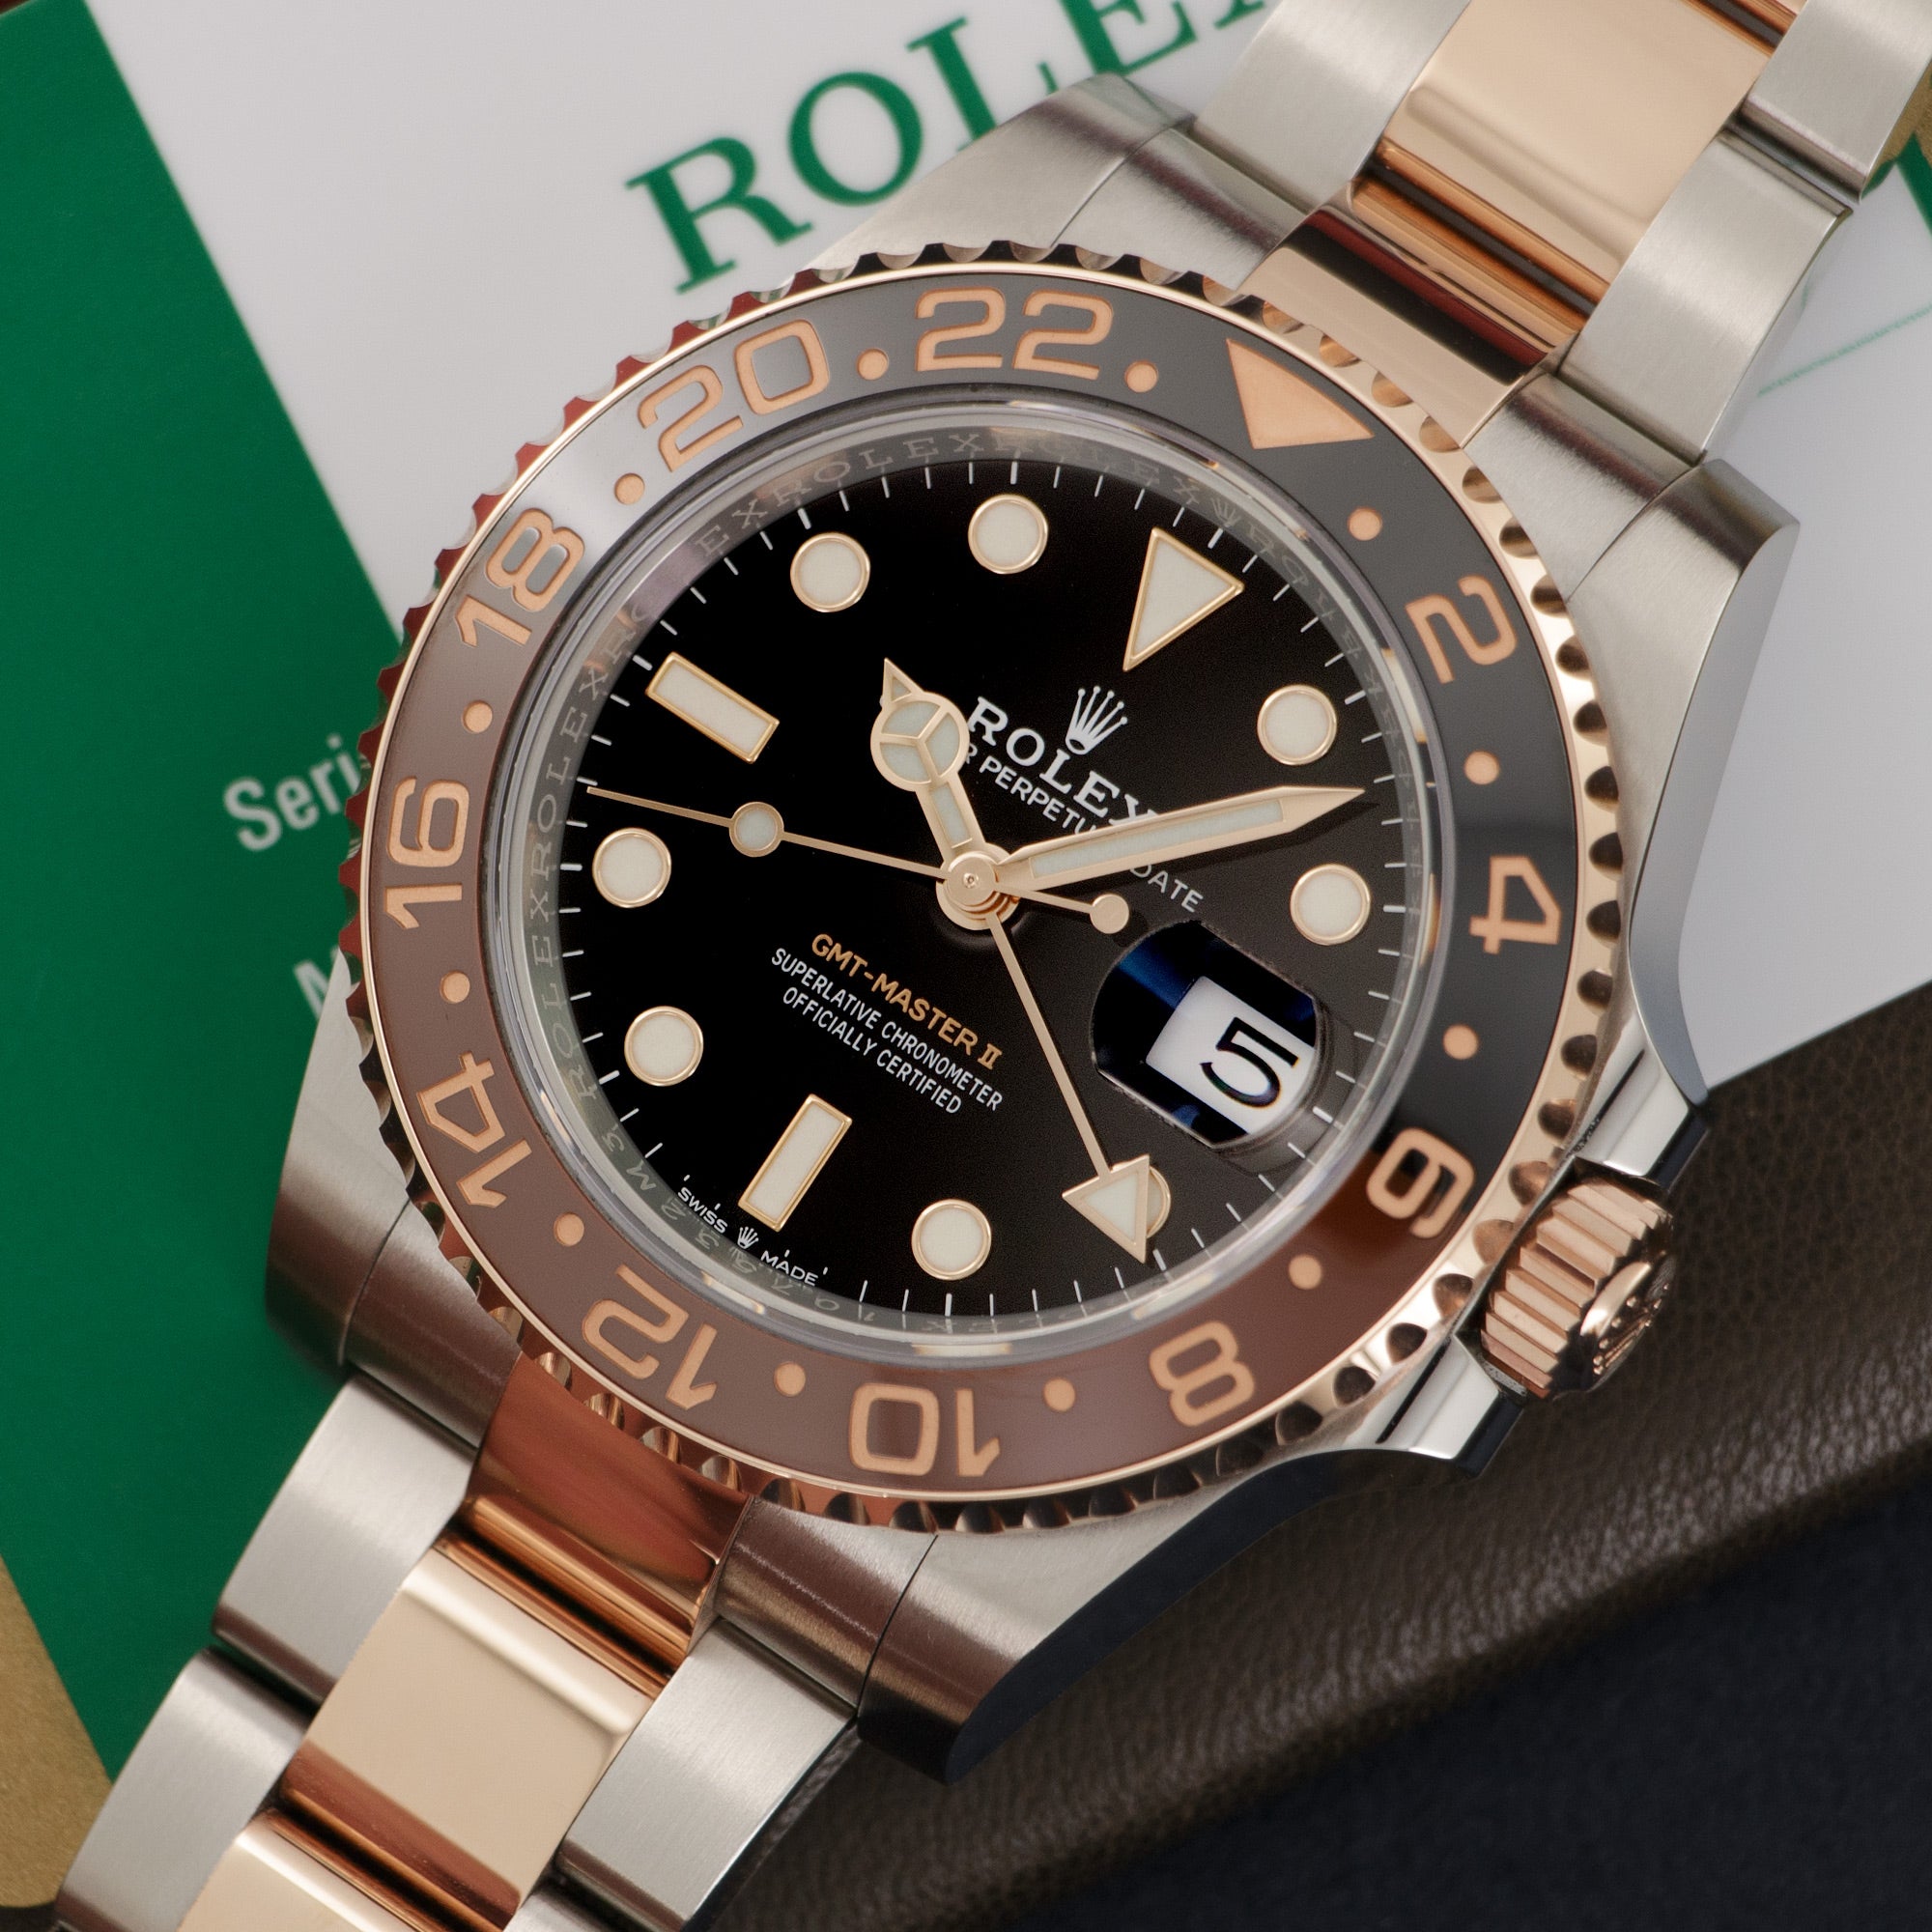 Rolex - Rolex Two-Tone Rose Gold GMT-Master II Watch Ref. 126711 - The Keystone Watches